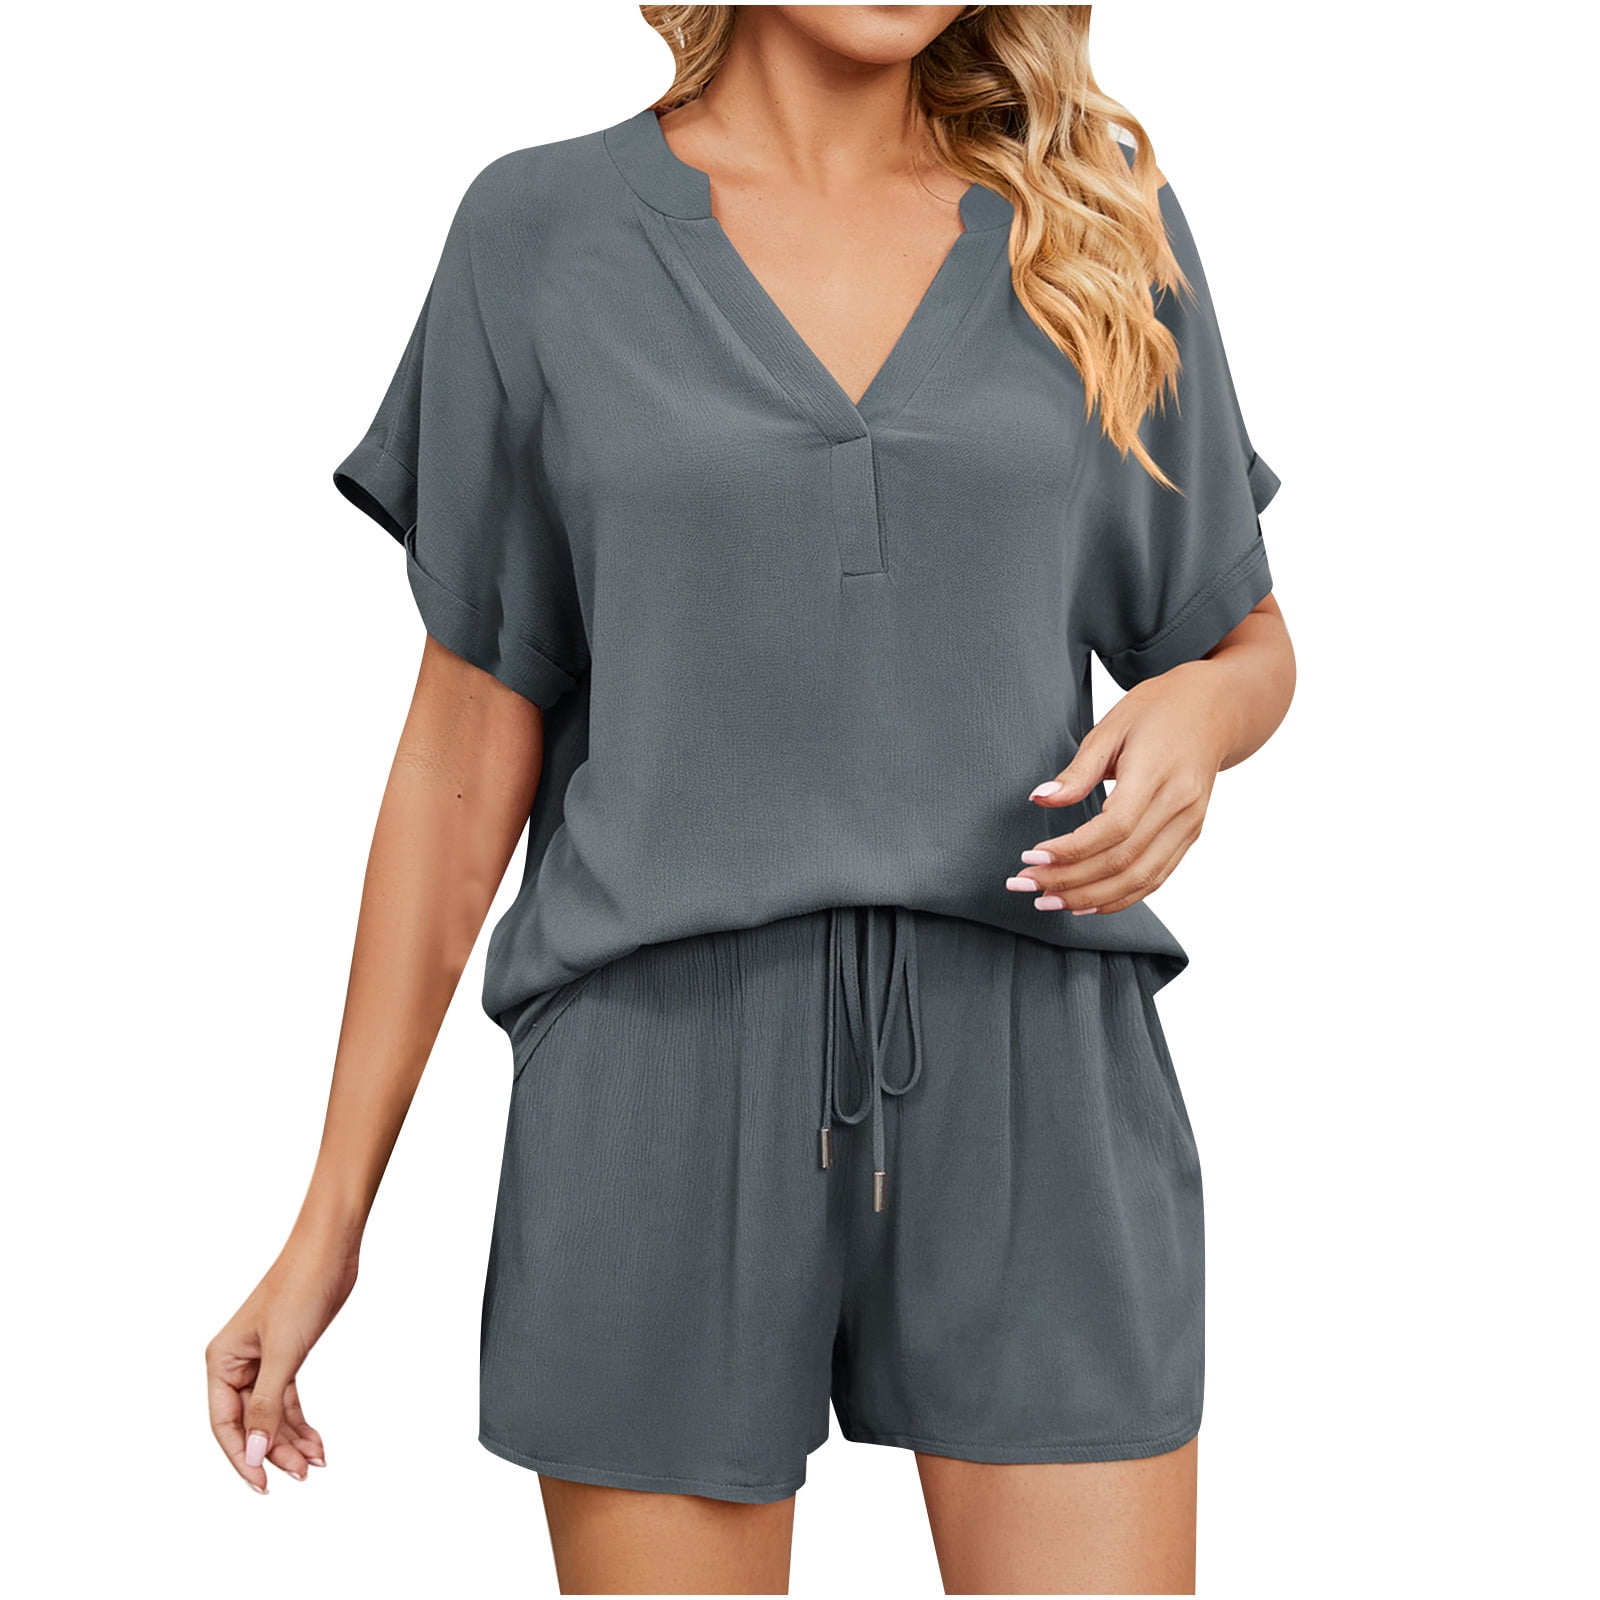 2 Piece Outfits for Women Summer - Fashion Solid V-neck Tops and Shorts Set  Comfortable Loose Elastic Playsuits 